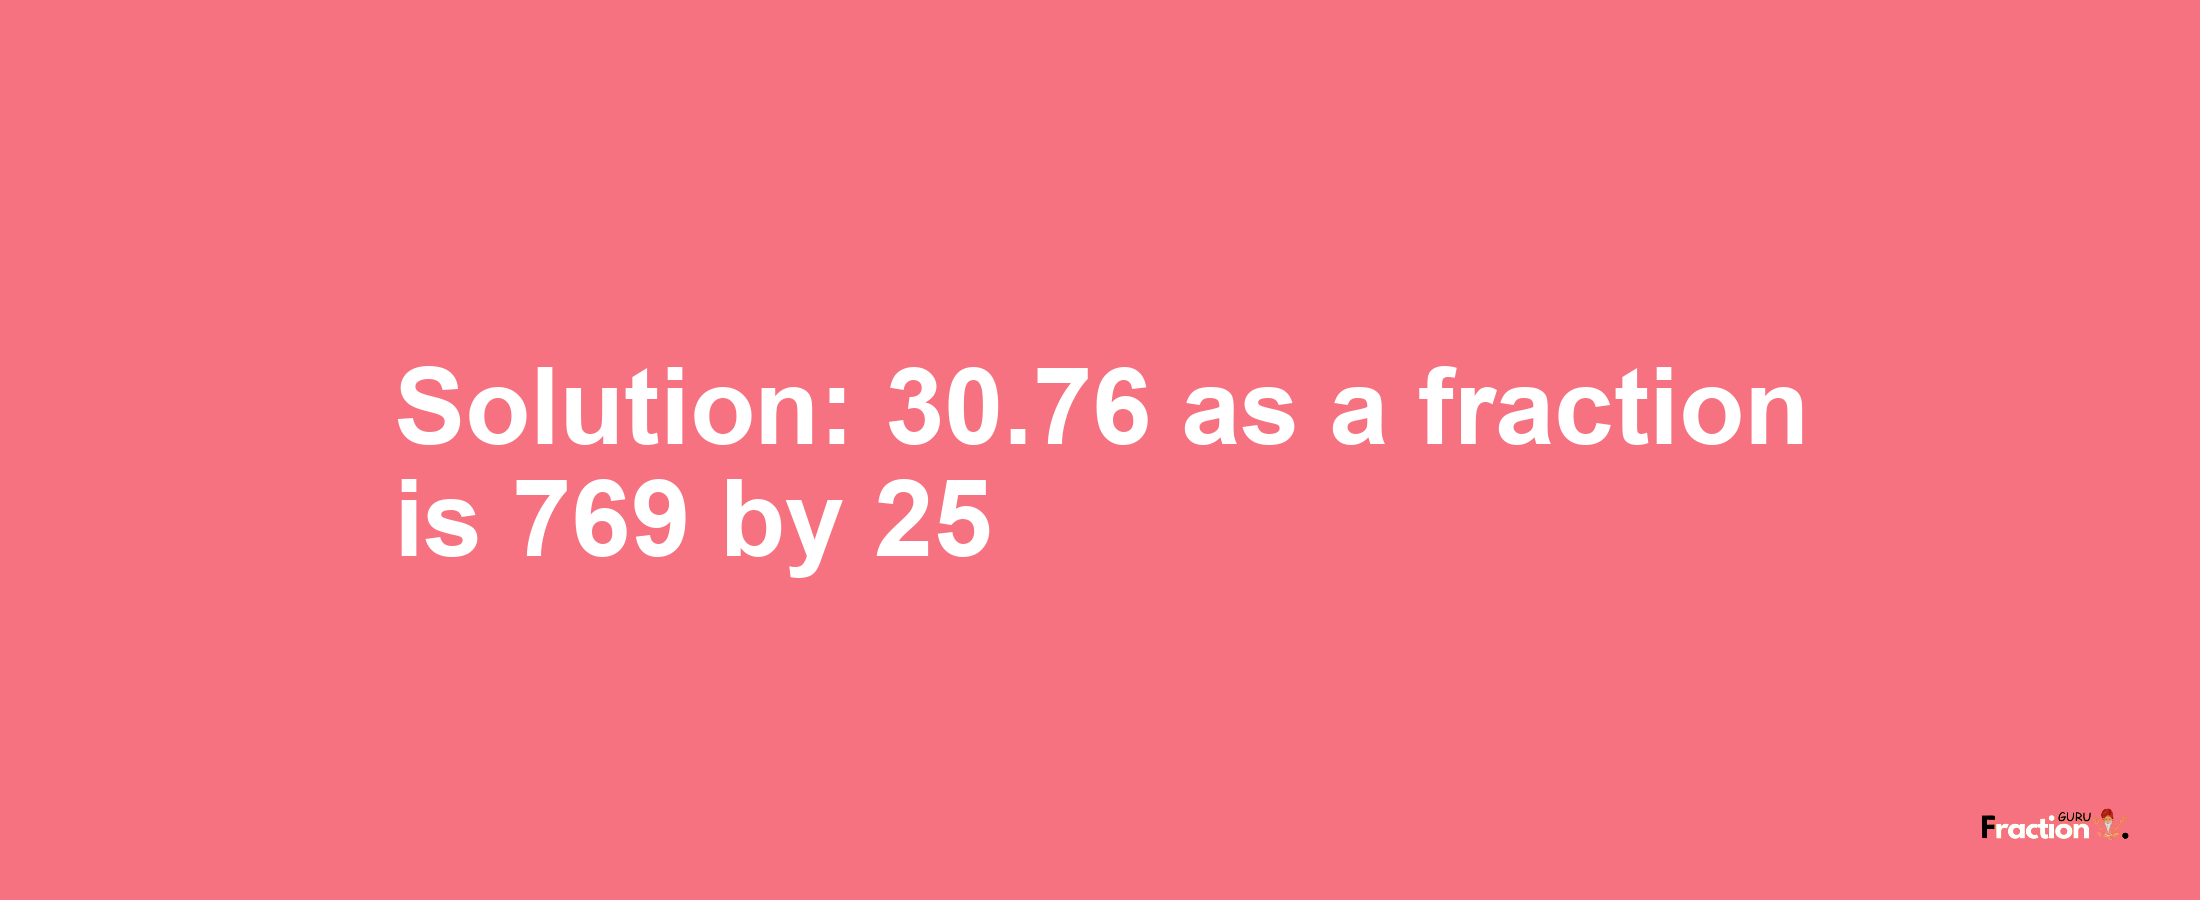 Solution:30.76 as a fraction is 769/25